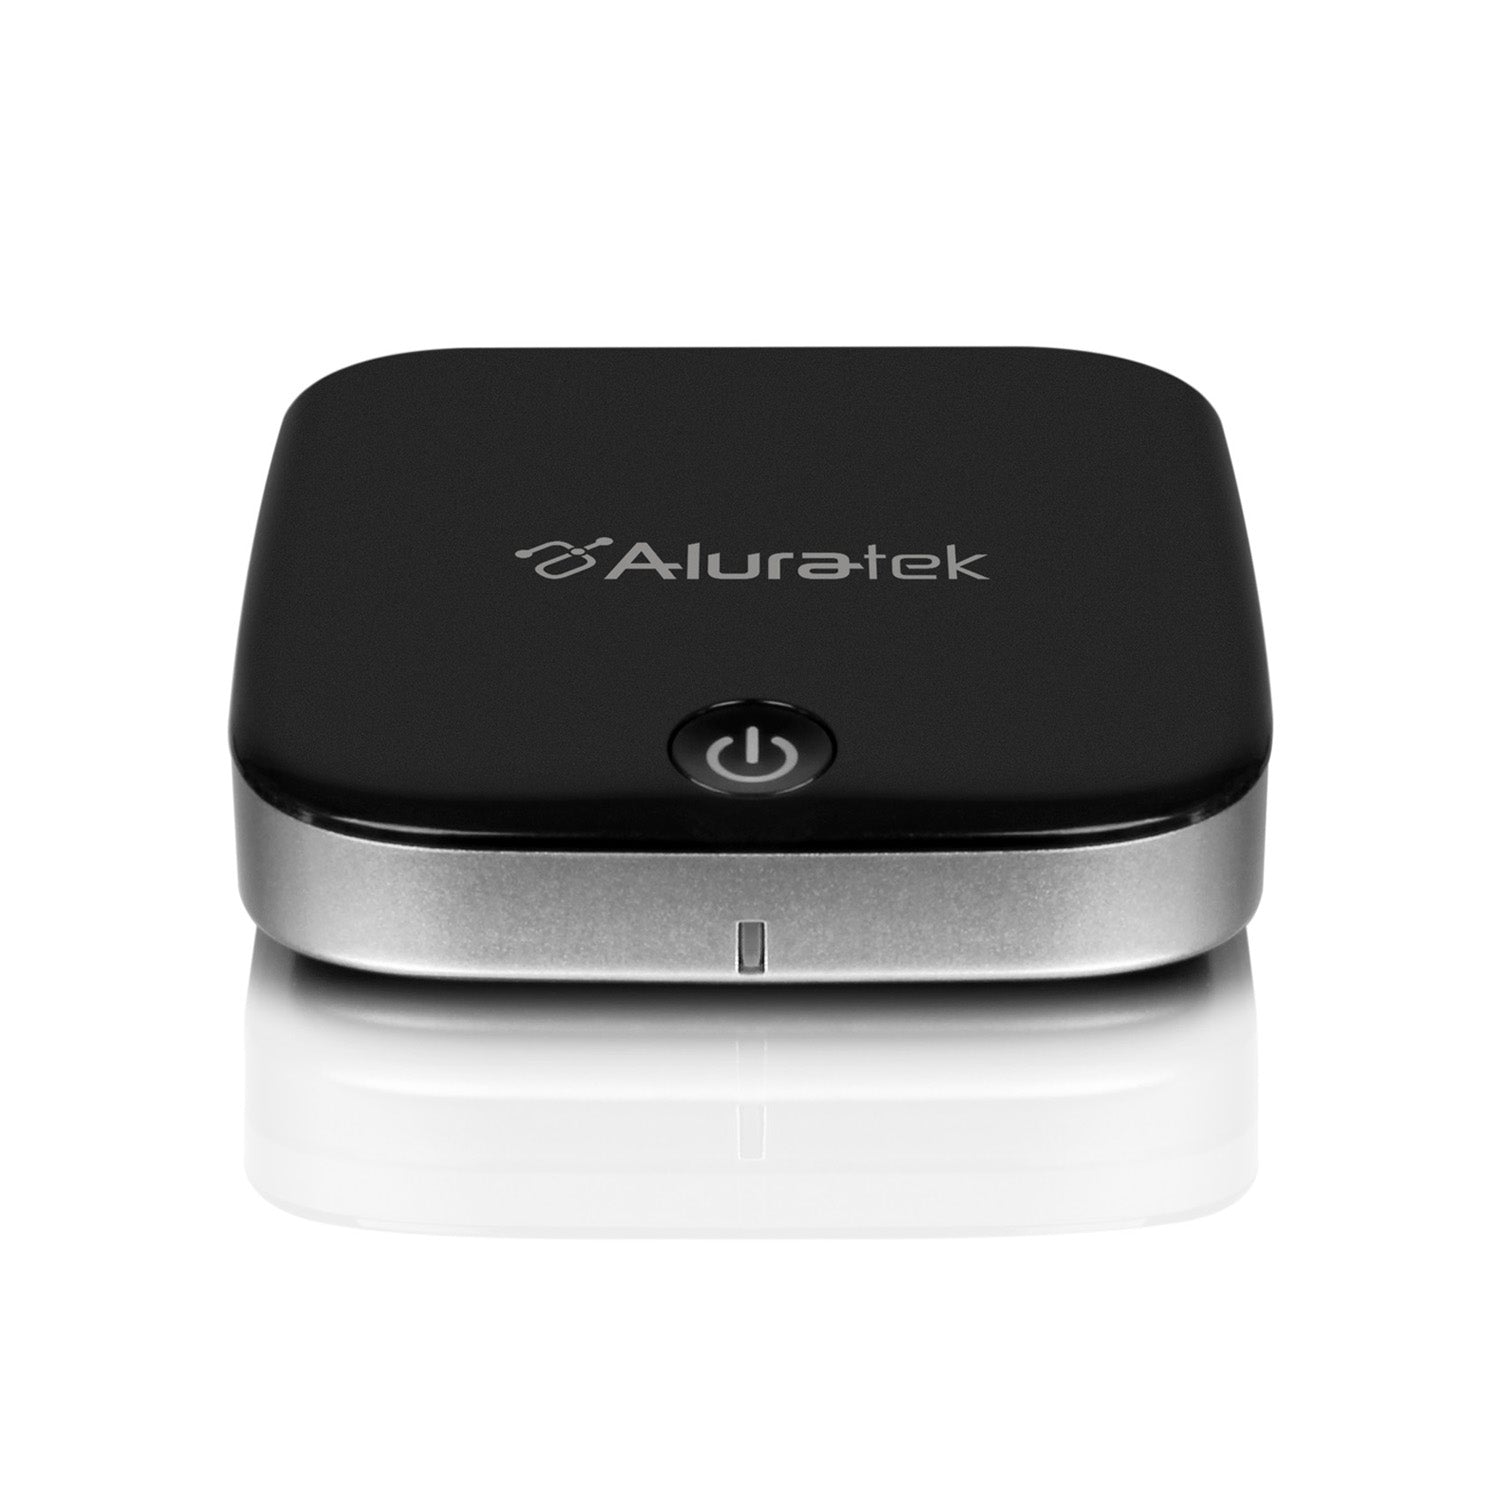 Aluratek Universal Bluetooth Audio Cassette Receiver, Built-in Rechargeable  Battery, Up to 8 Hours Playtime, Audio Receiving up to 33 Feet, ABCT01F